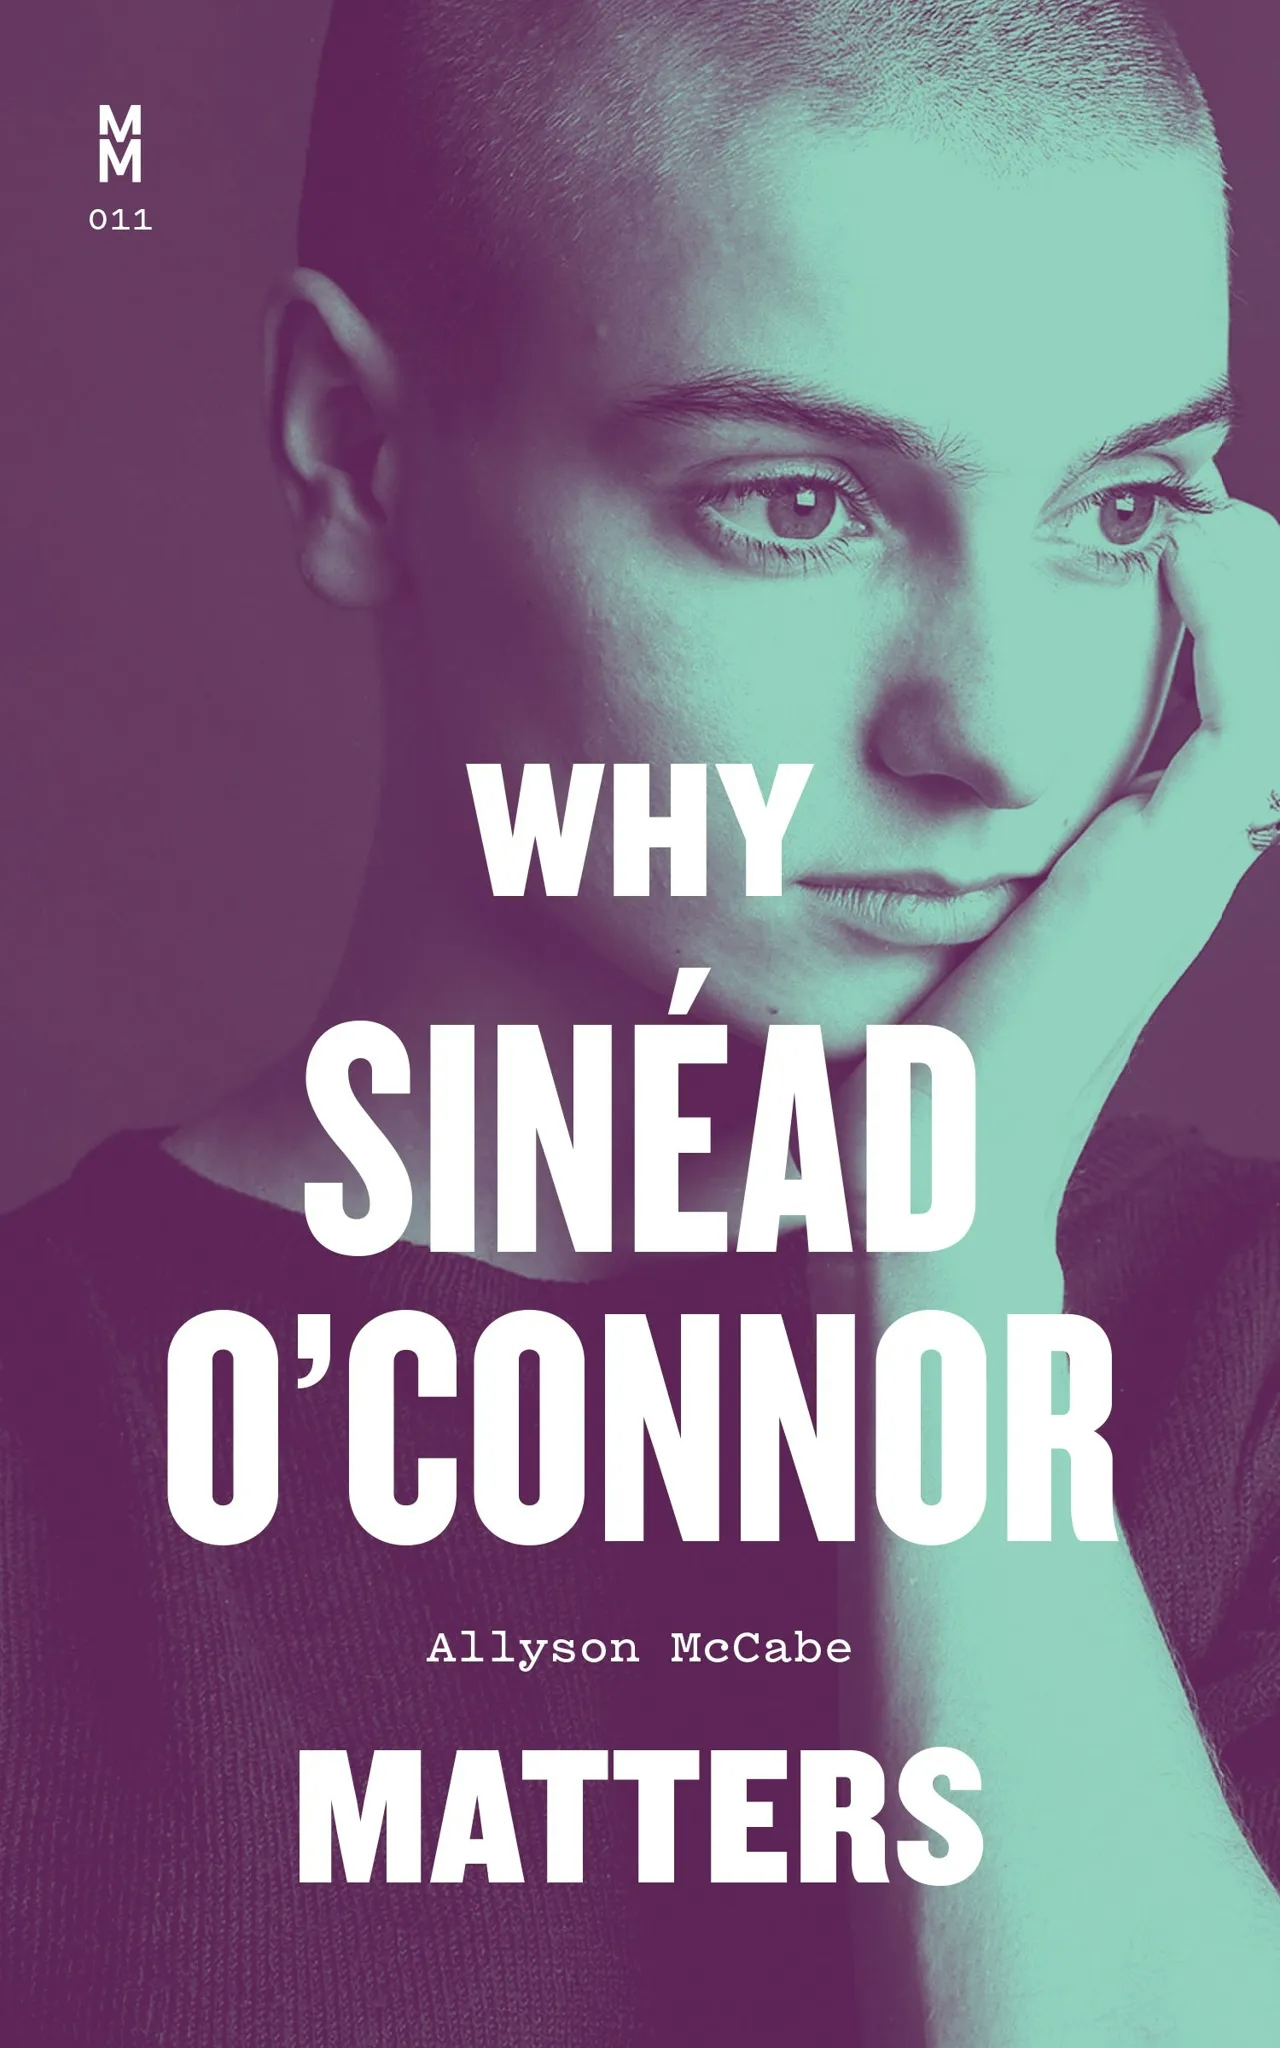 Album artwork for Album artwork for Why Sinéad O'Connor Matters by Allyson McCabe by Why Sinéad O'Connor Matters - Allyson McCabe